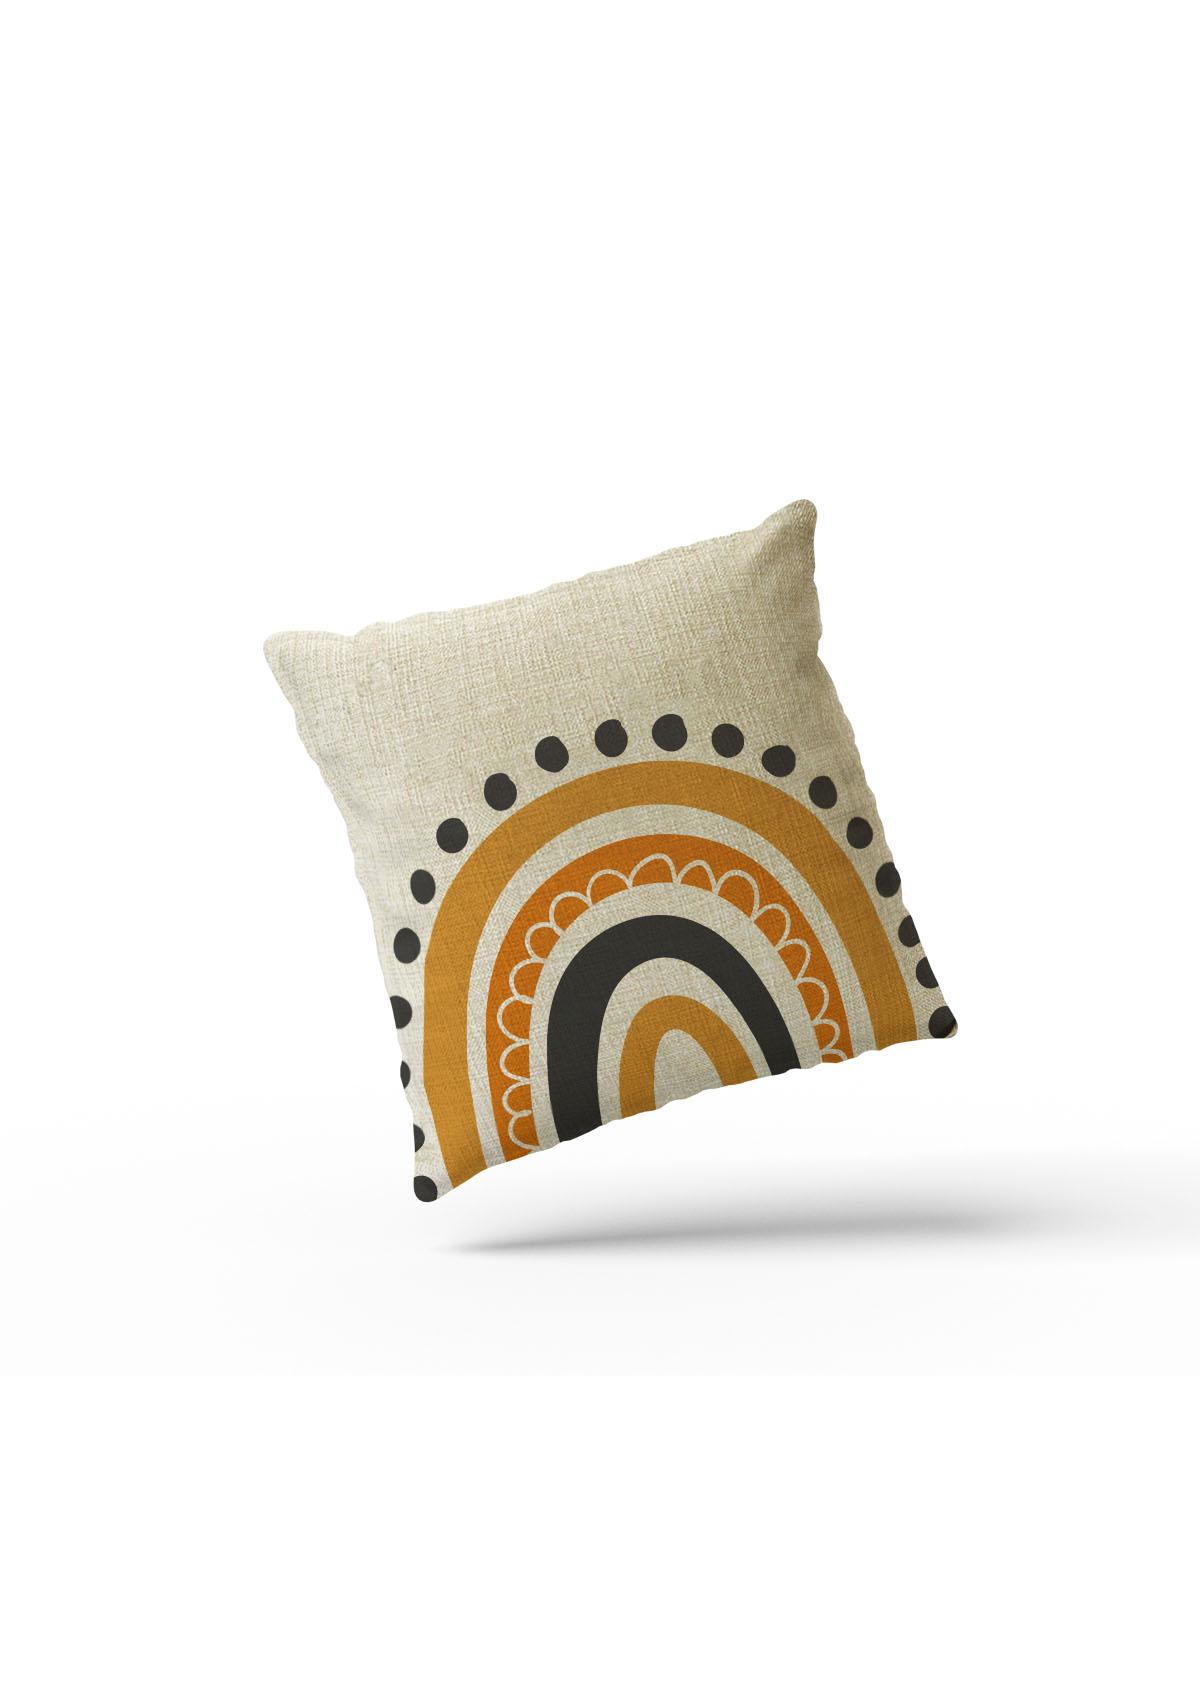 Abstract Patterned Cushion Cover